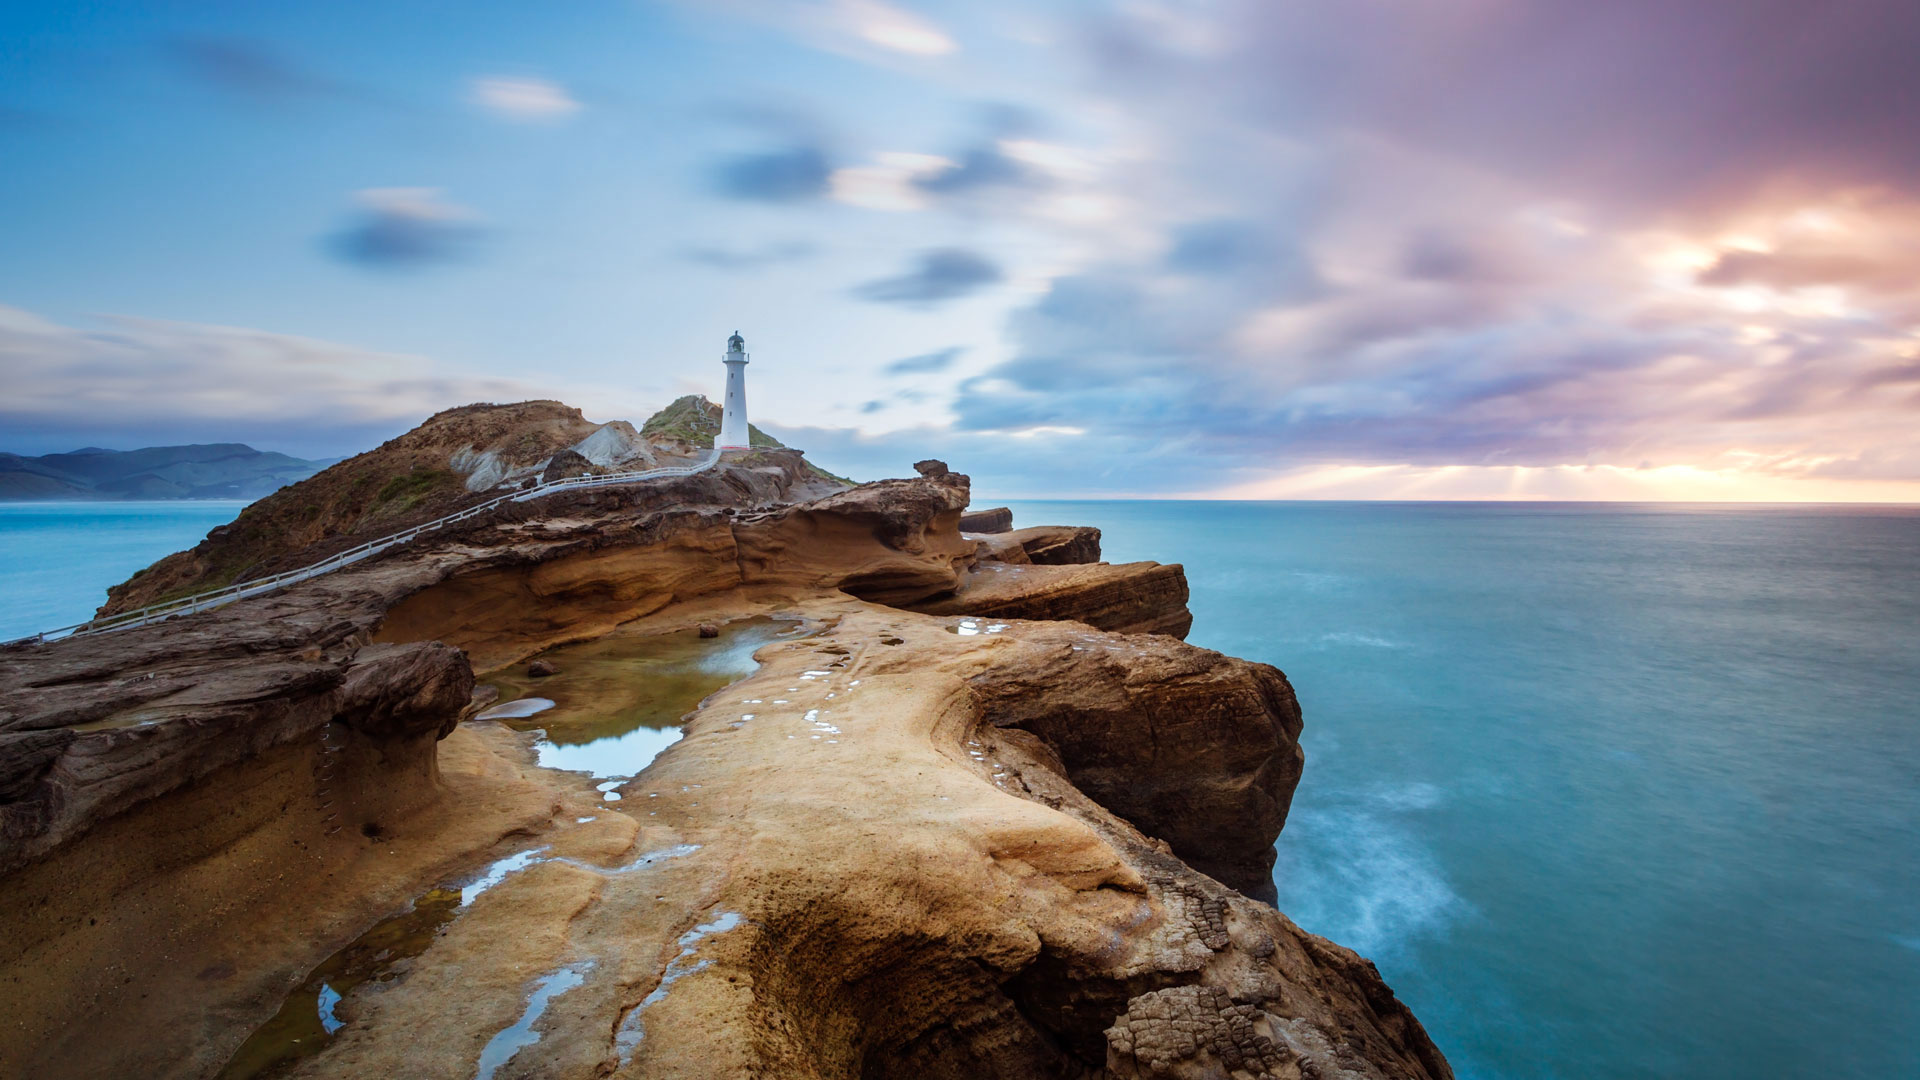 Castle-Point-Lighthouse-near-the-village-of-Castlepoint-North-Island-of-New-Zealand-20170912.jpg